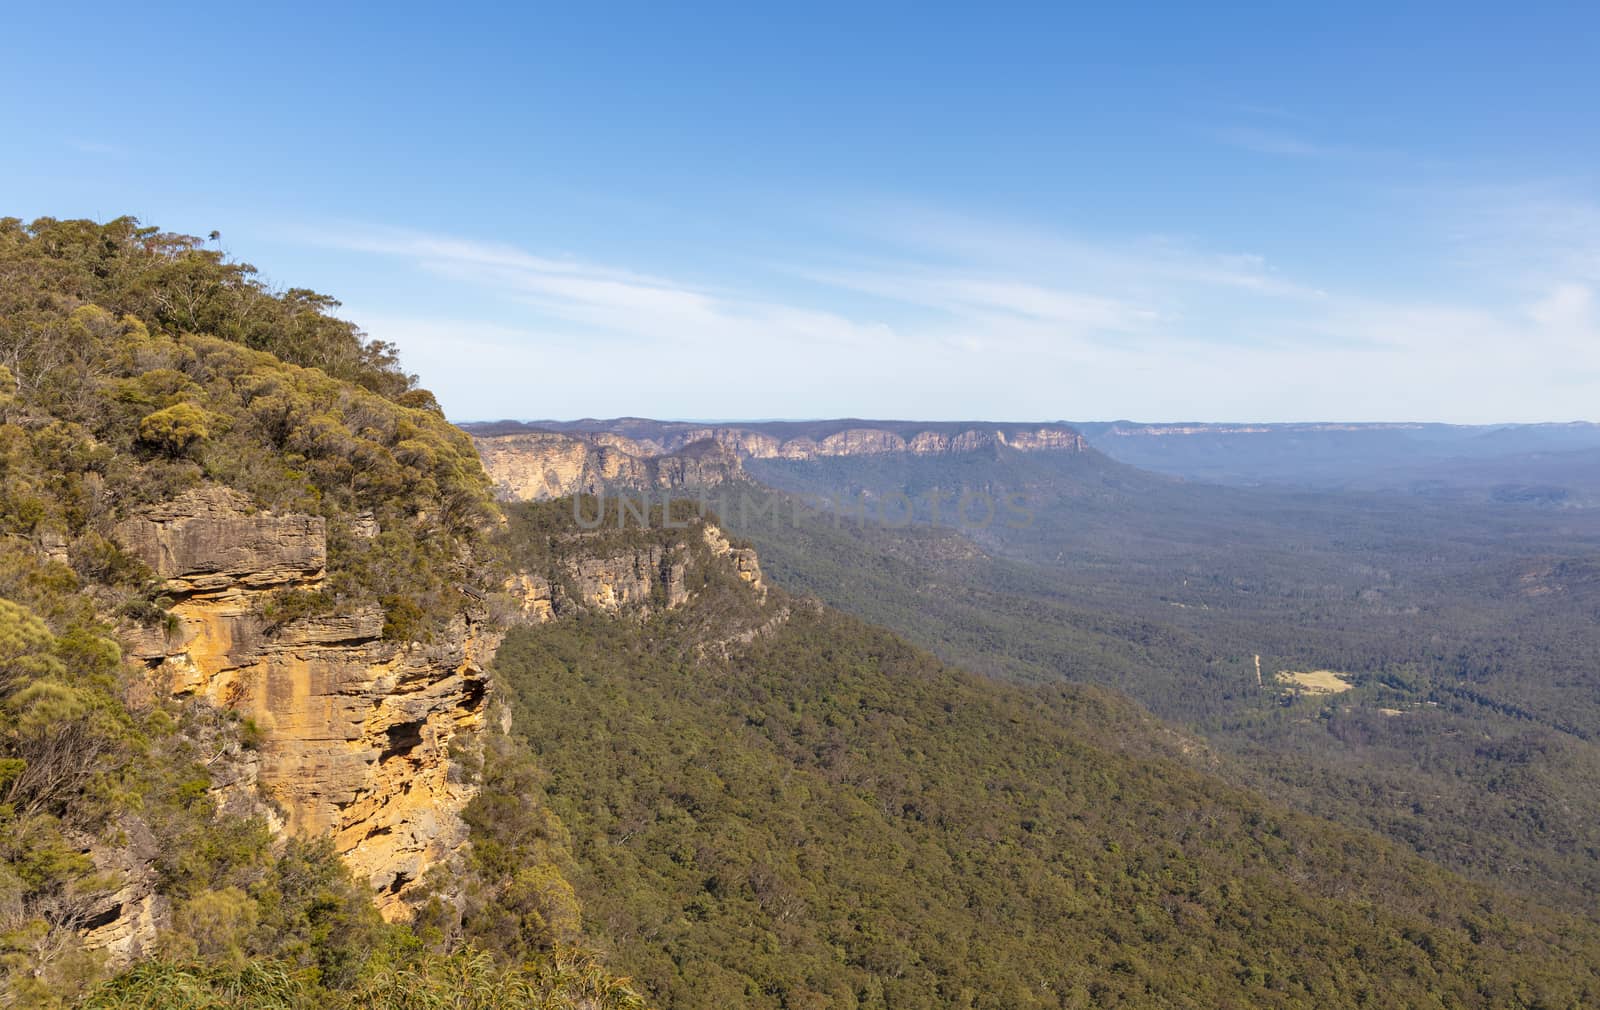 The Kedumba Pass in The Blue Mountains in Australia by WittkePhotos